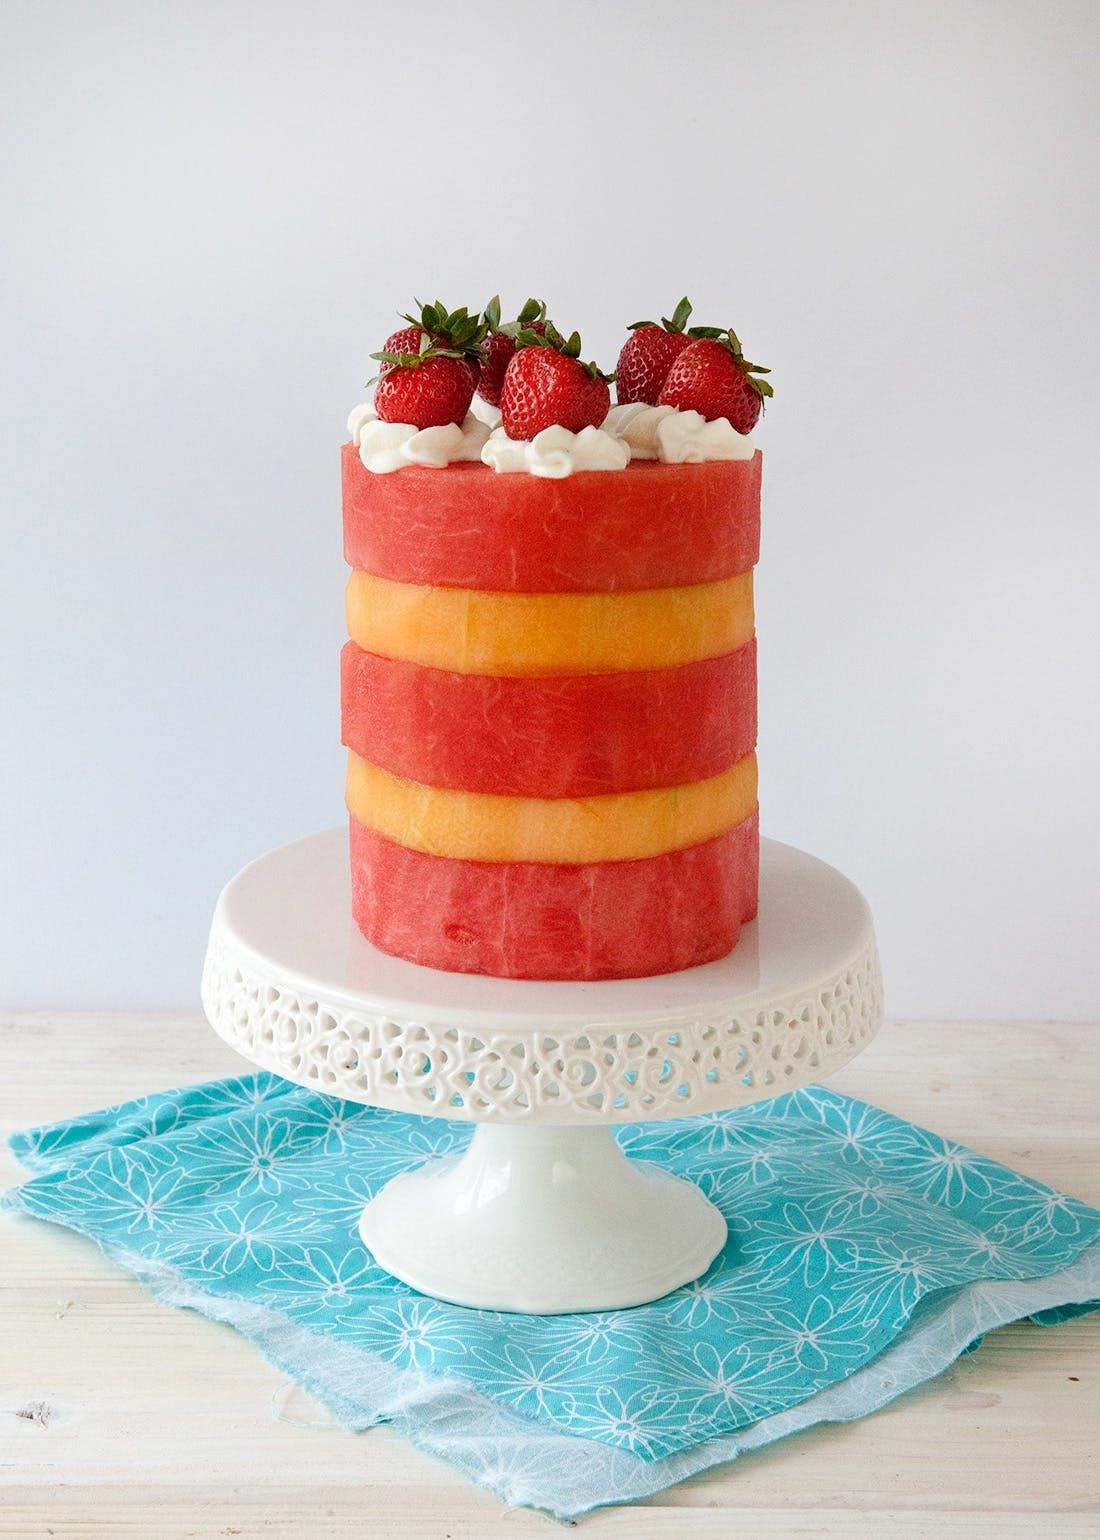 Watermelon Cake: Refreshing, Stunning and Top 9-Free - Allergic Living